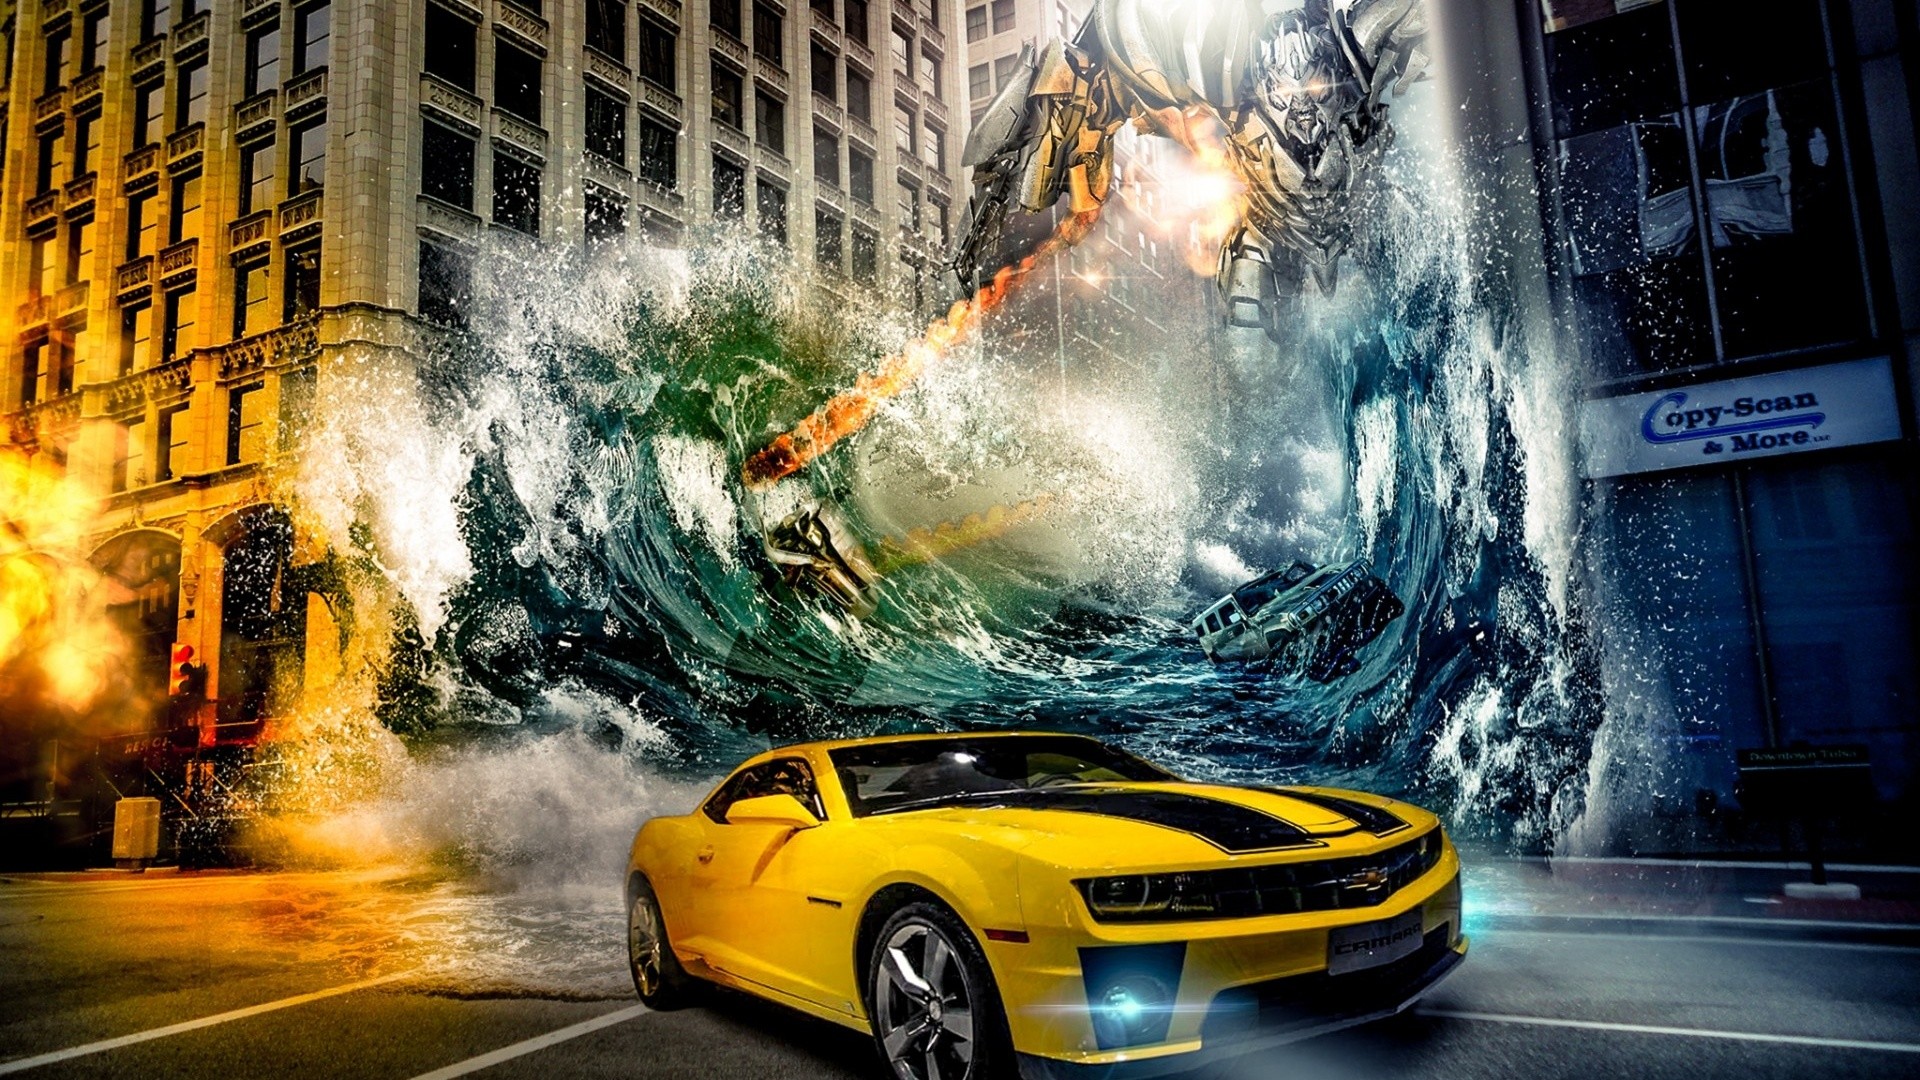 transformers 4 hd images